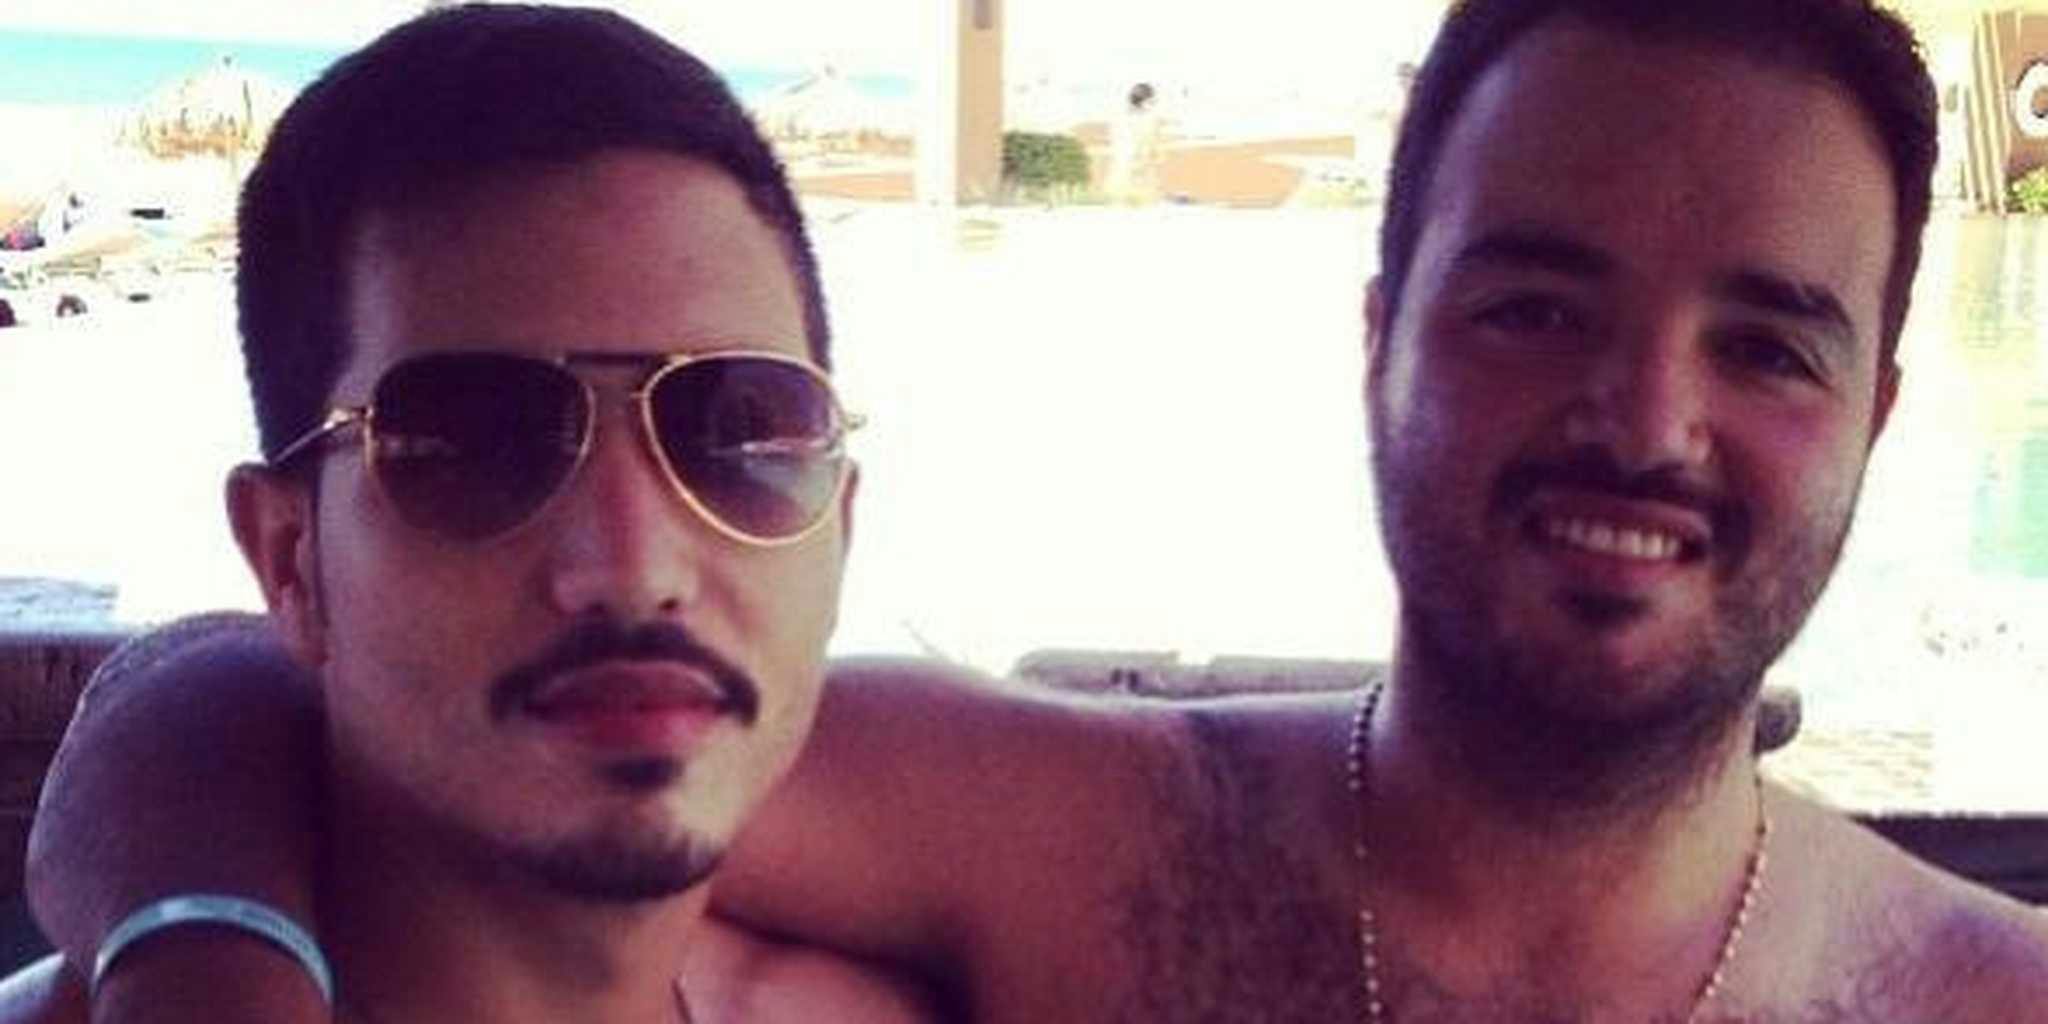 Sons of Mexican cartel leaders flaunt guns, cars, and giant cats on Twitter